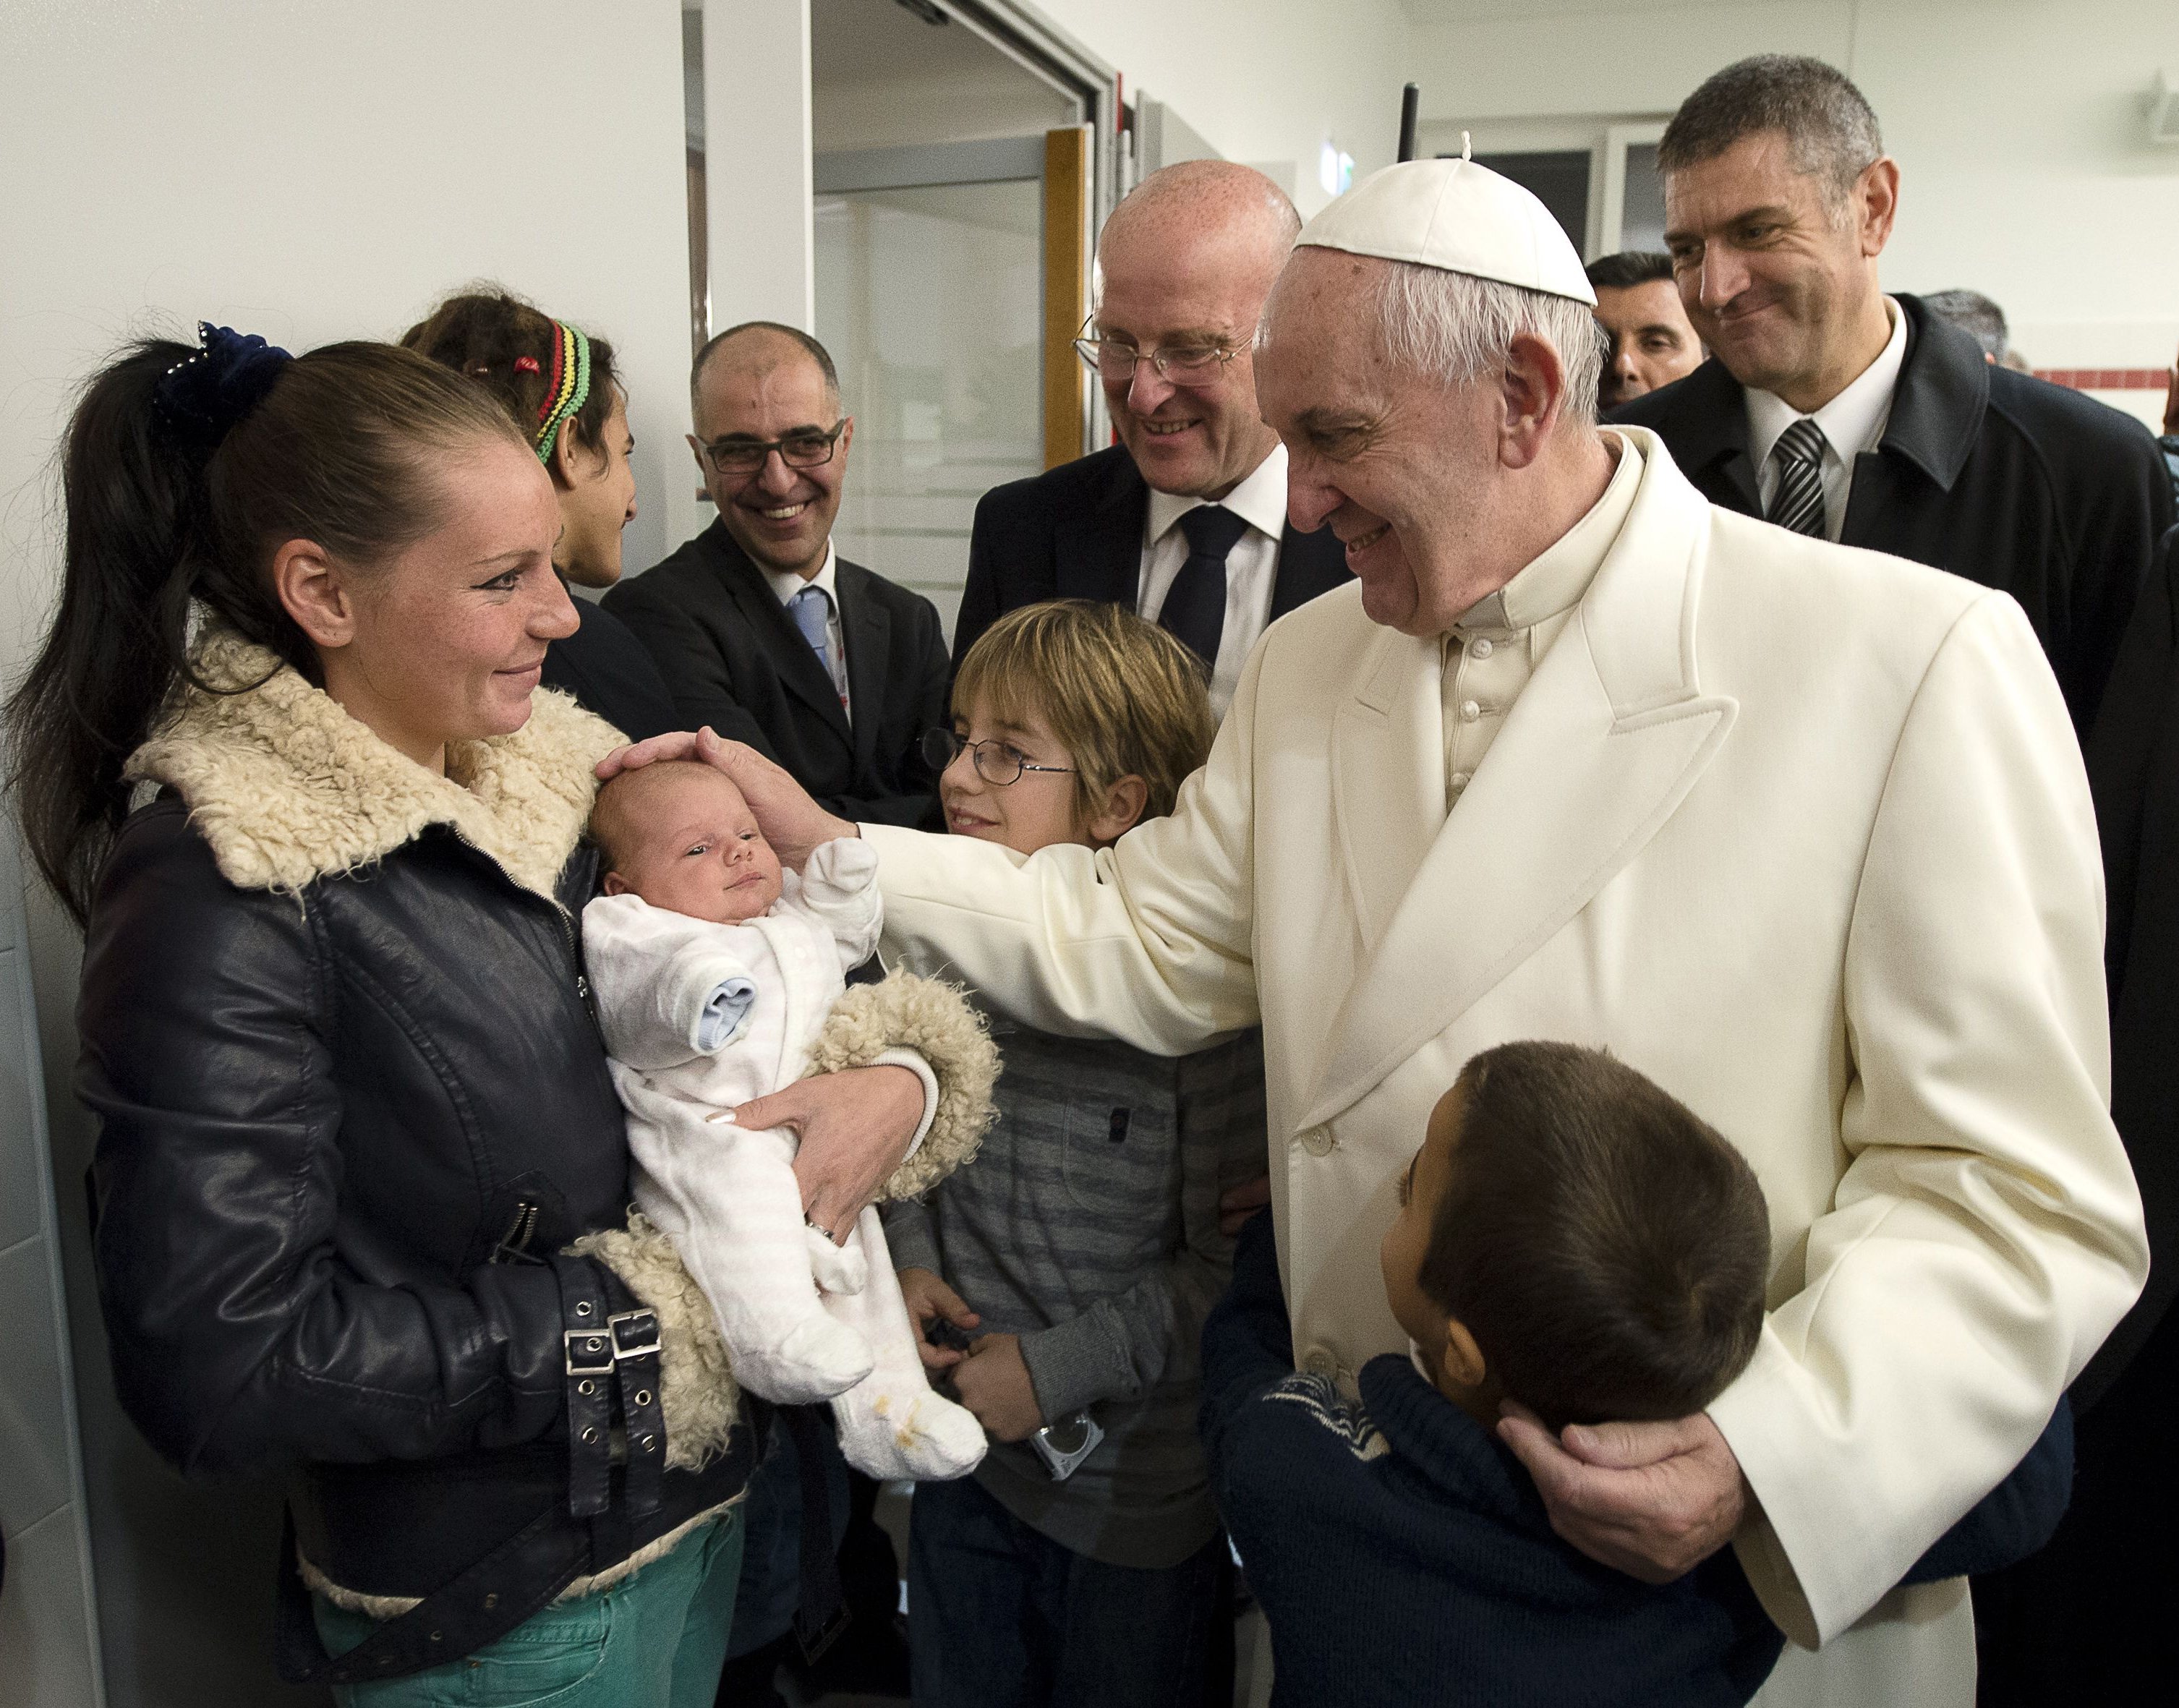 Pope Francis blesses a baby during a visit to a Caritas center for the homeless near the Termini rail station in Rome Dec. 18, 2015. (CNS photo/L'Osservatore Romano, handout)